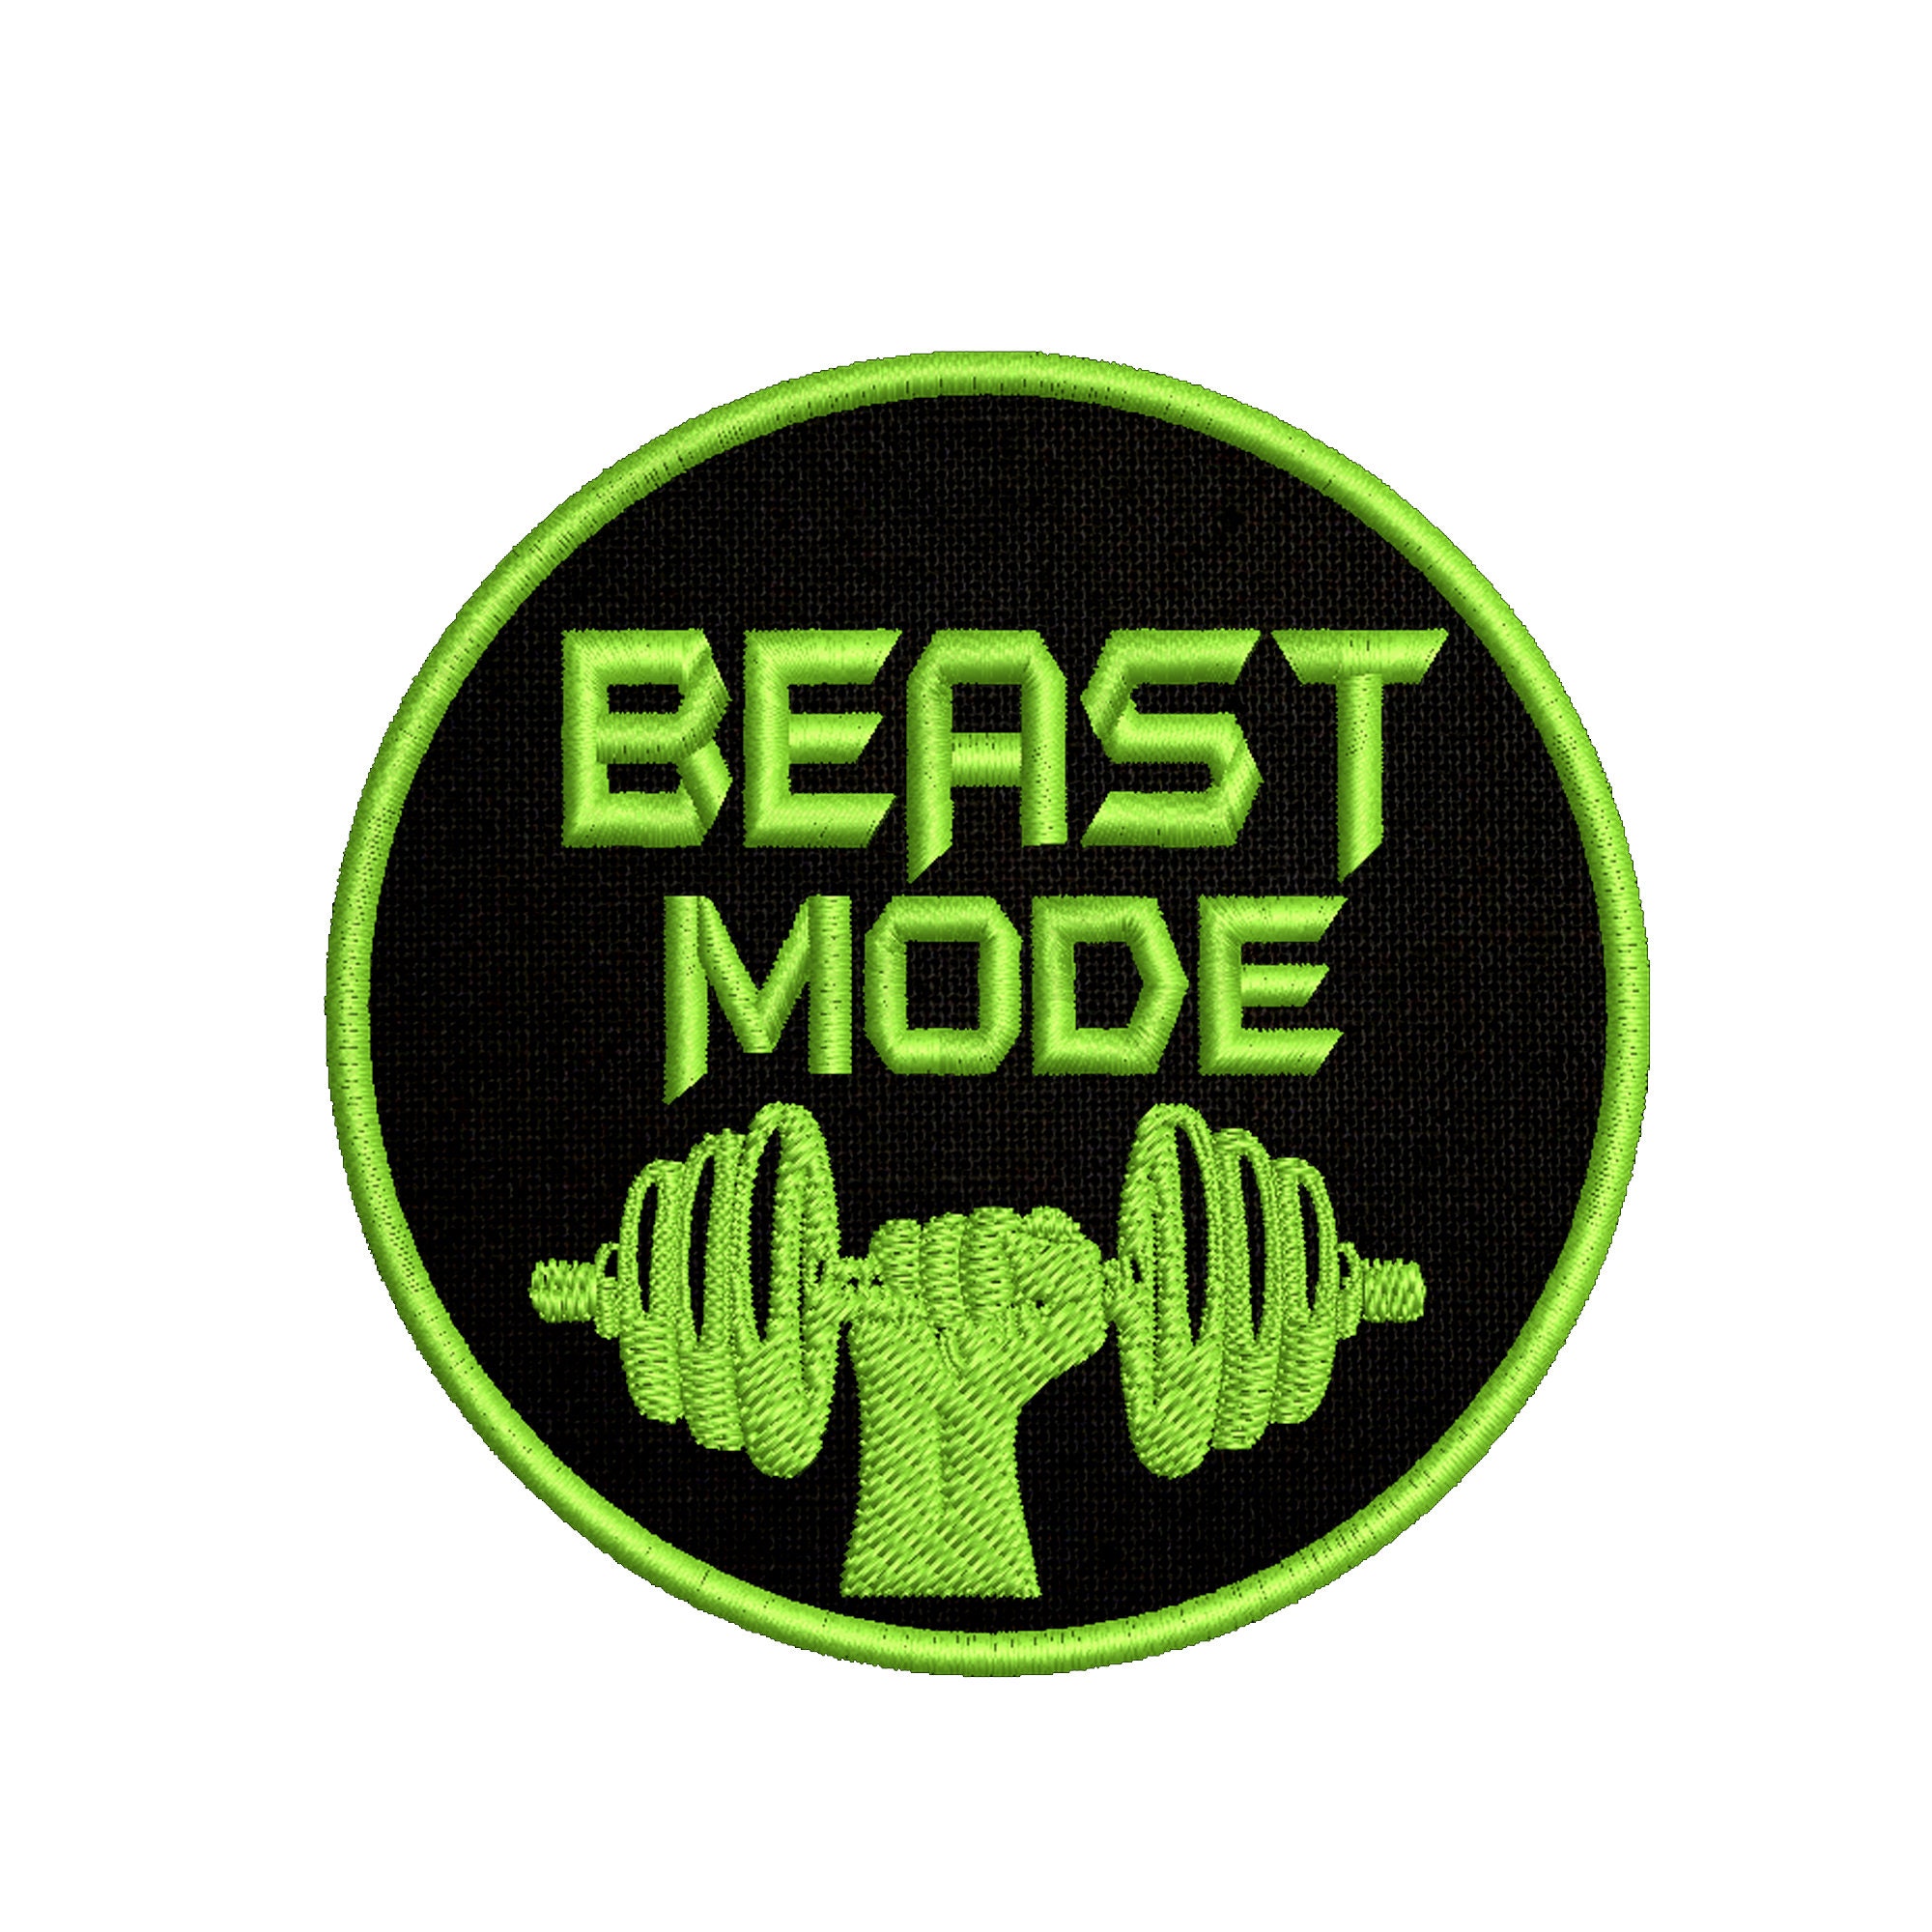 Beast Mode Activated - 2x3 Patch, Black